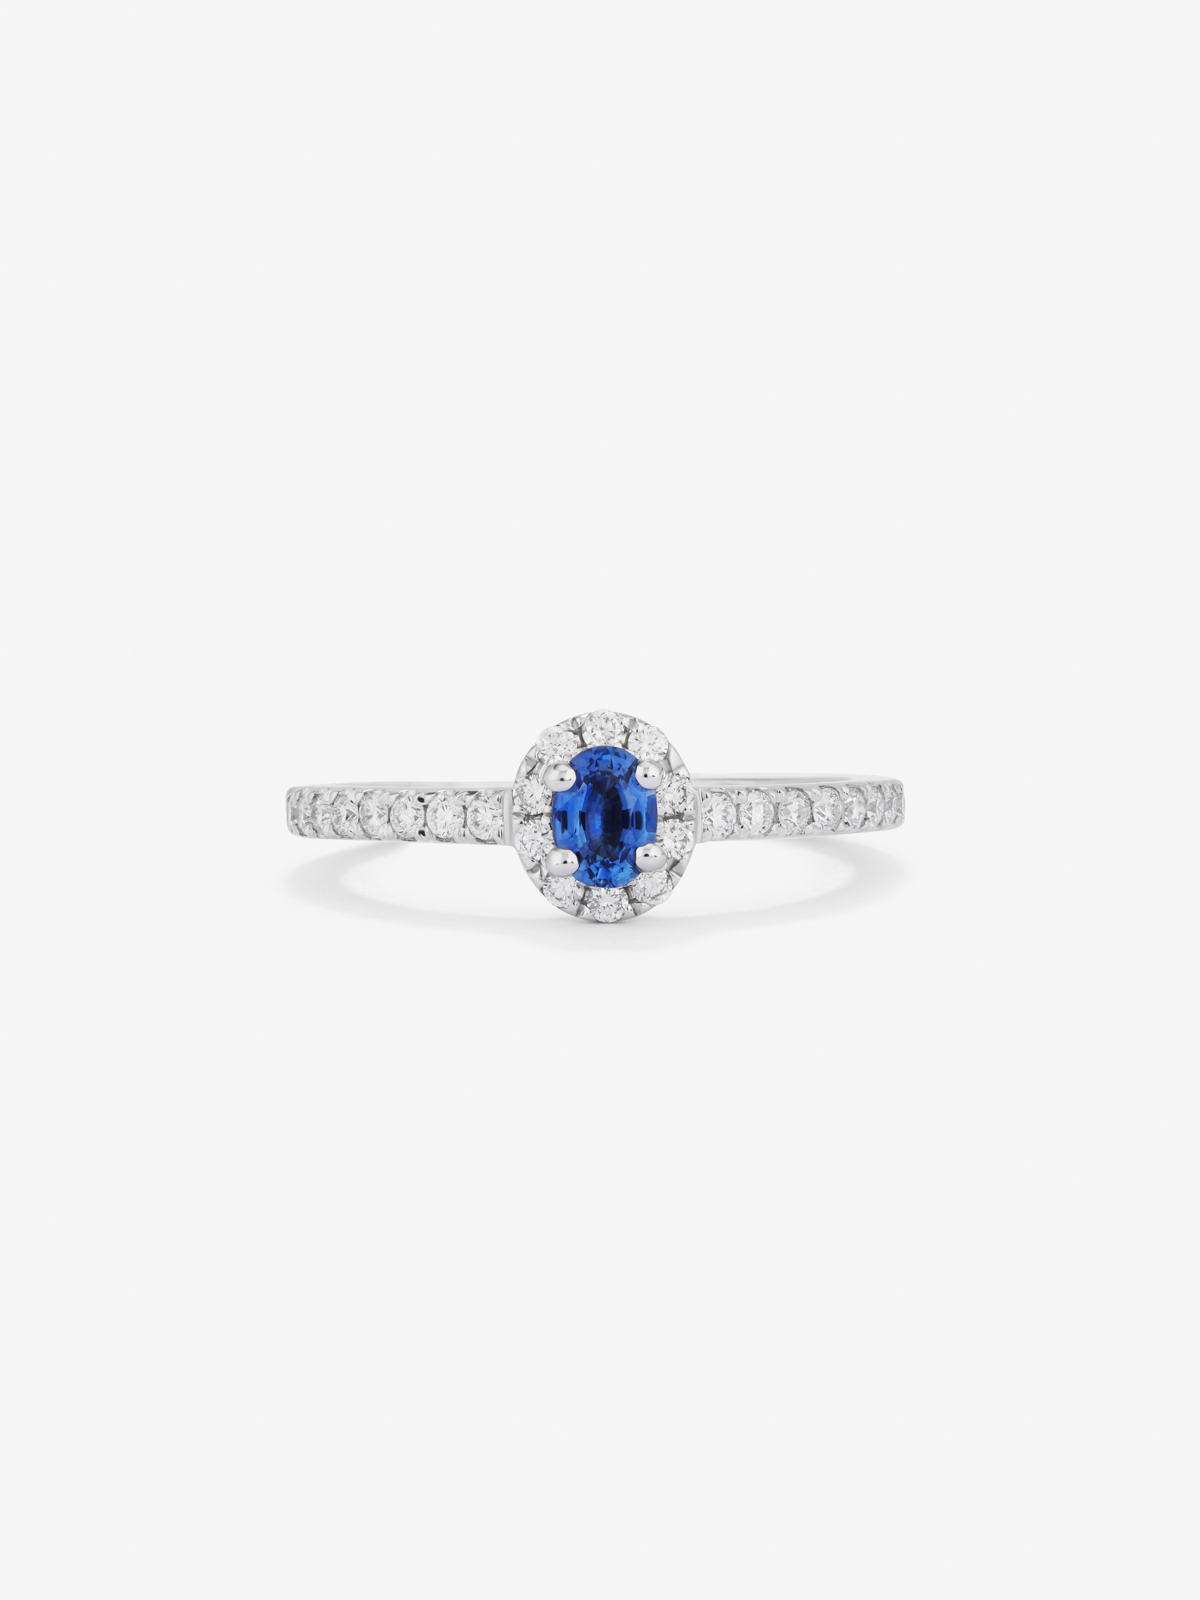 18K White Gold Ring with Azul Blue Sap